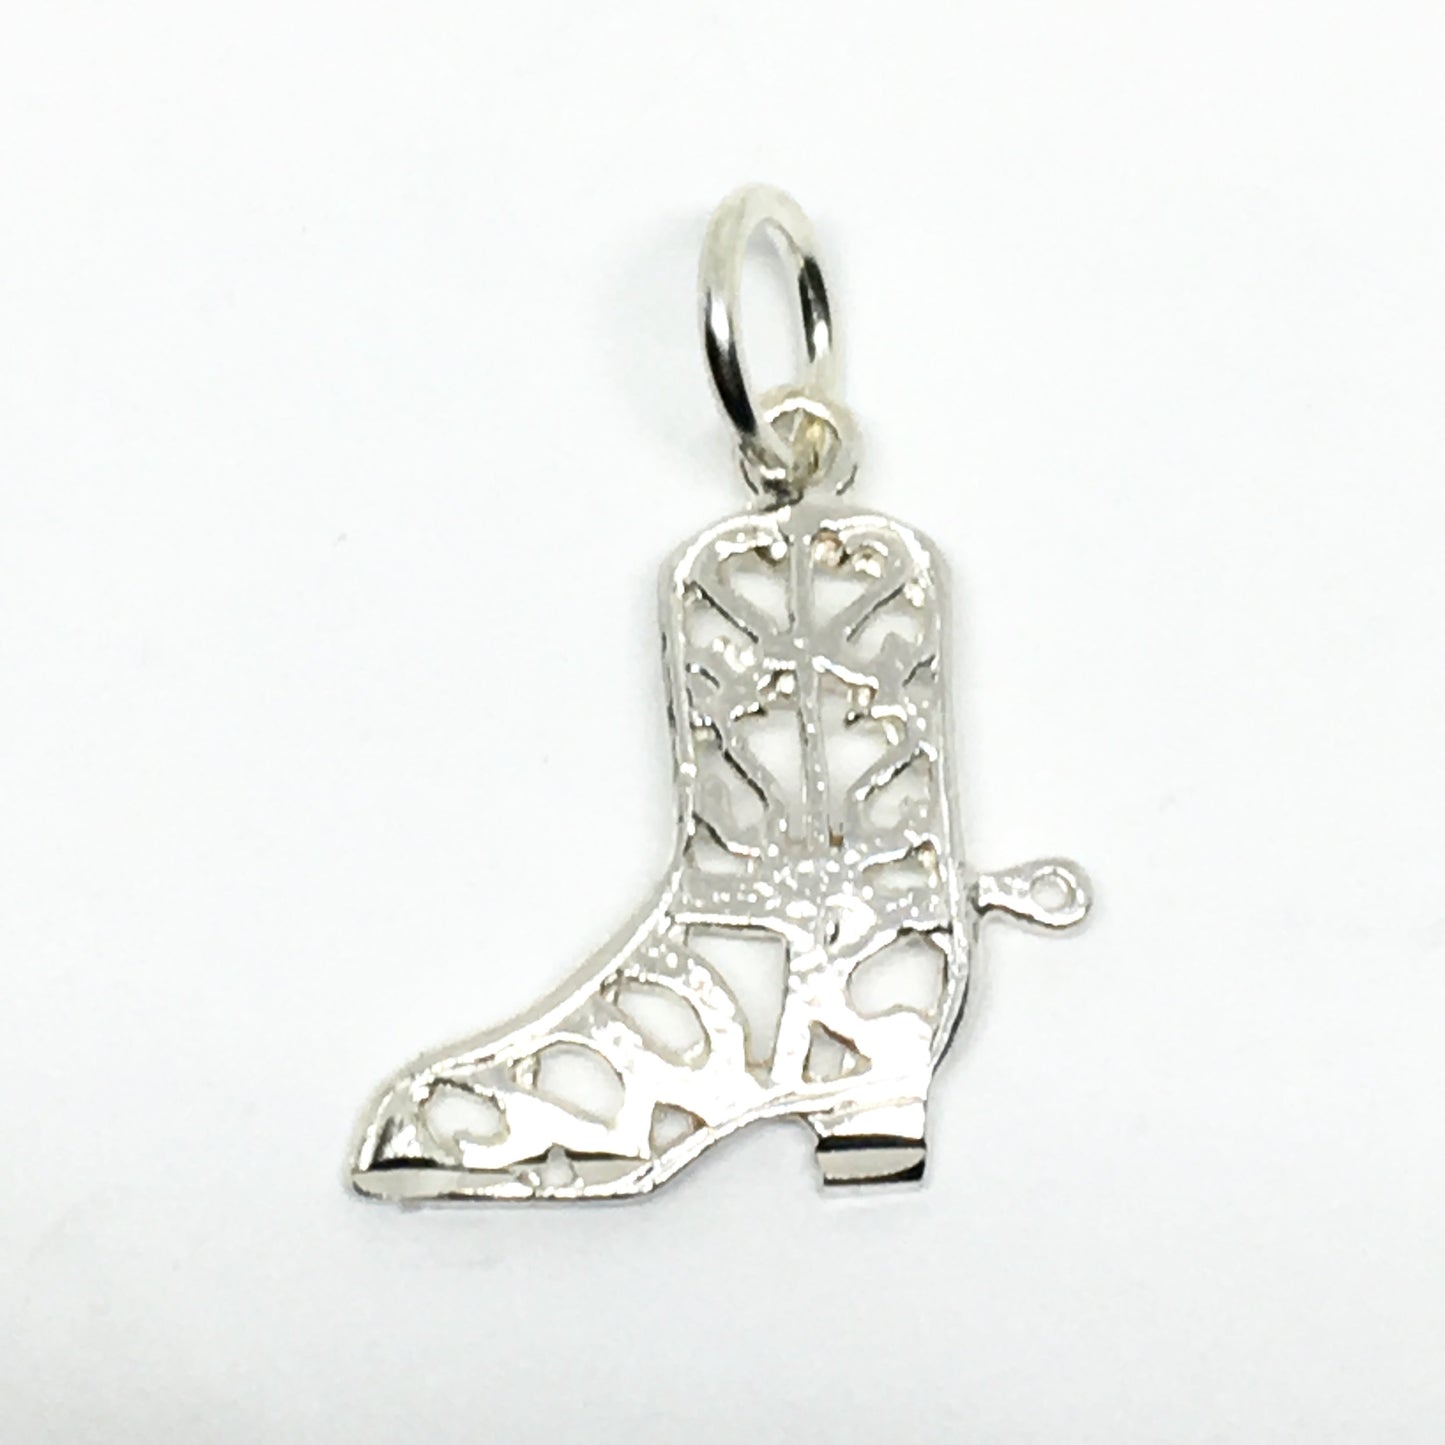 Silver Charm | Sterling Silver Southwestern Style Cowboy Boot Charm Pendant - Blingschlingers.com USA